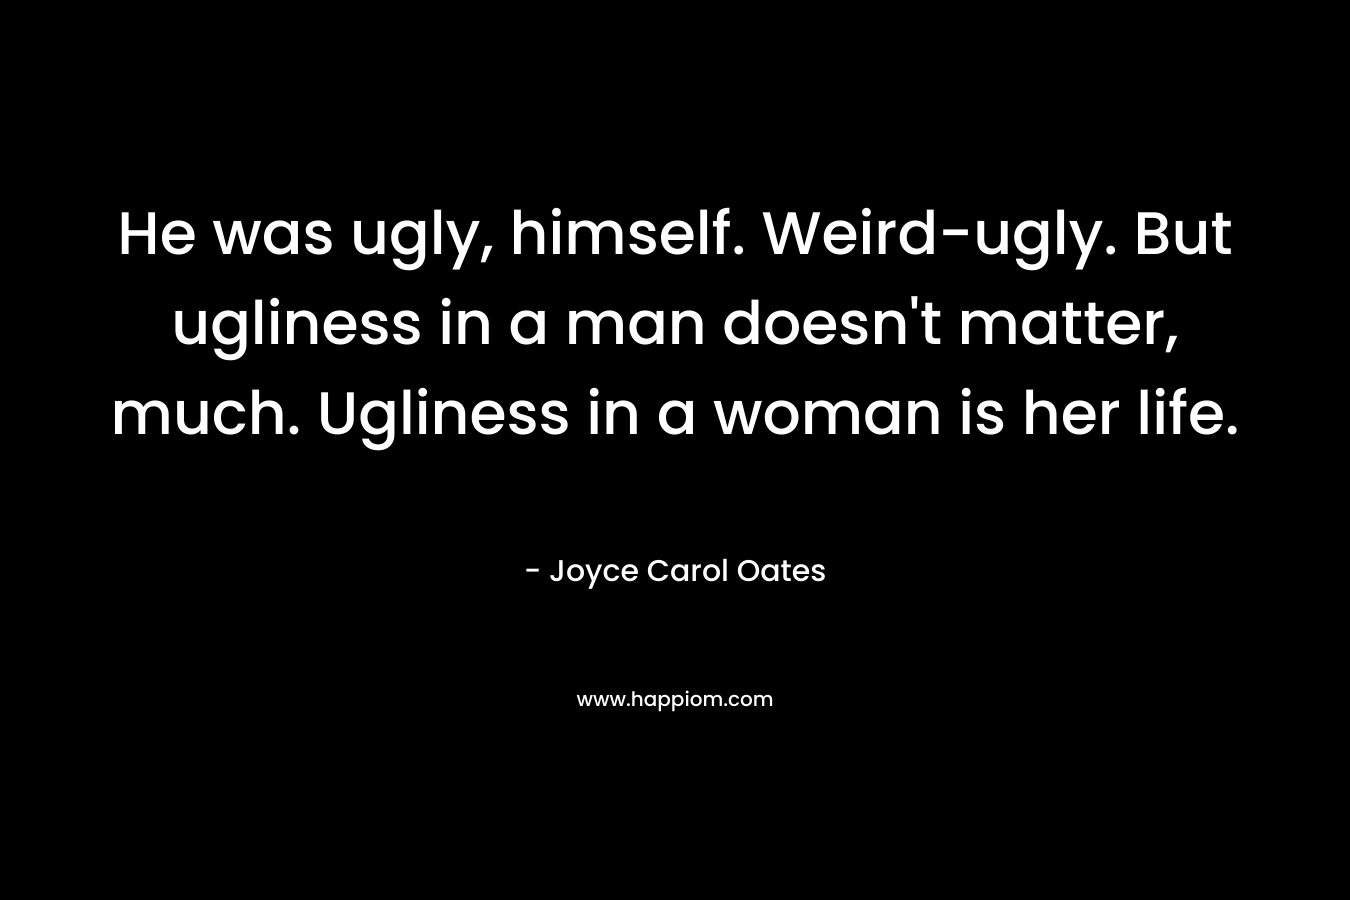 He was ugly, himself. Weird-ugly. But ugliness in a man doesn’t matter, much. Ugliness in a woman is her life. – Joyce Carol Oates